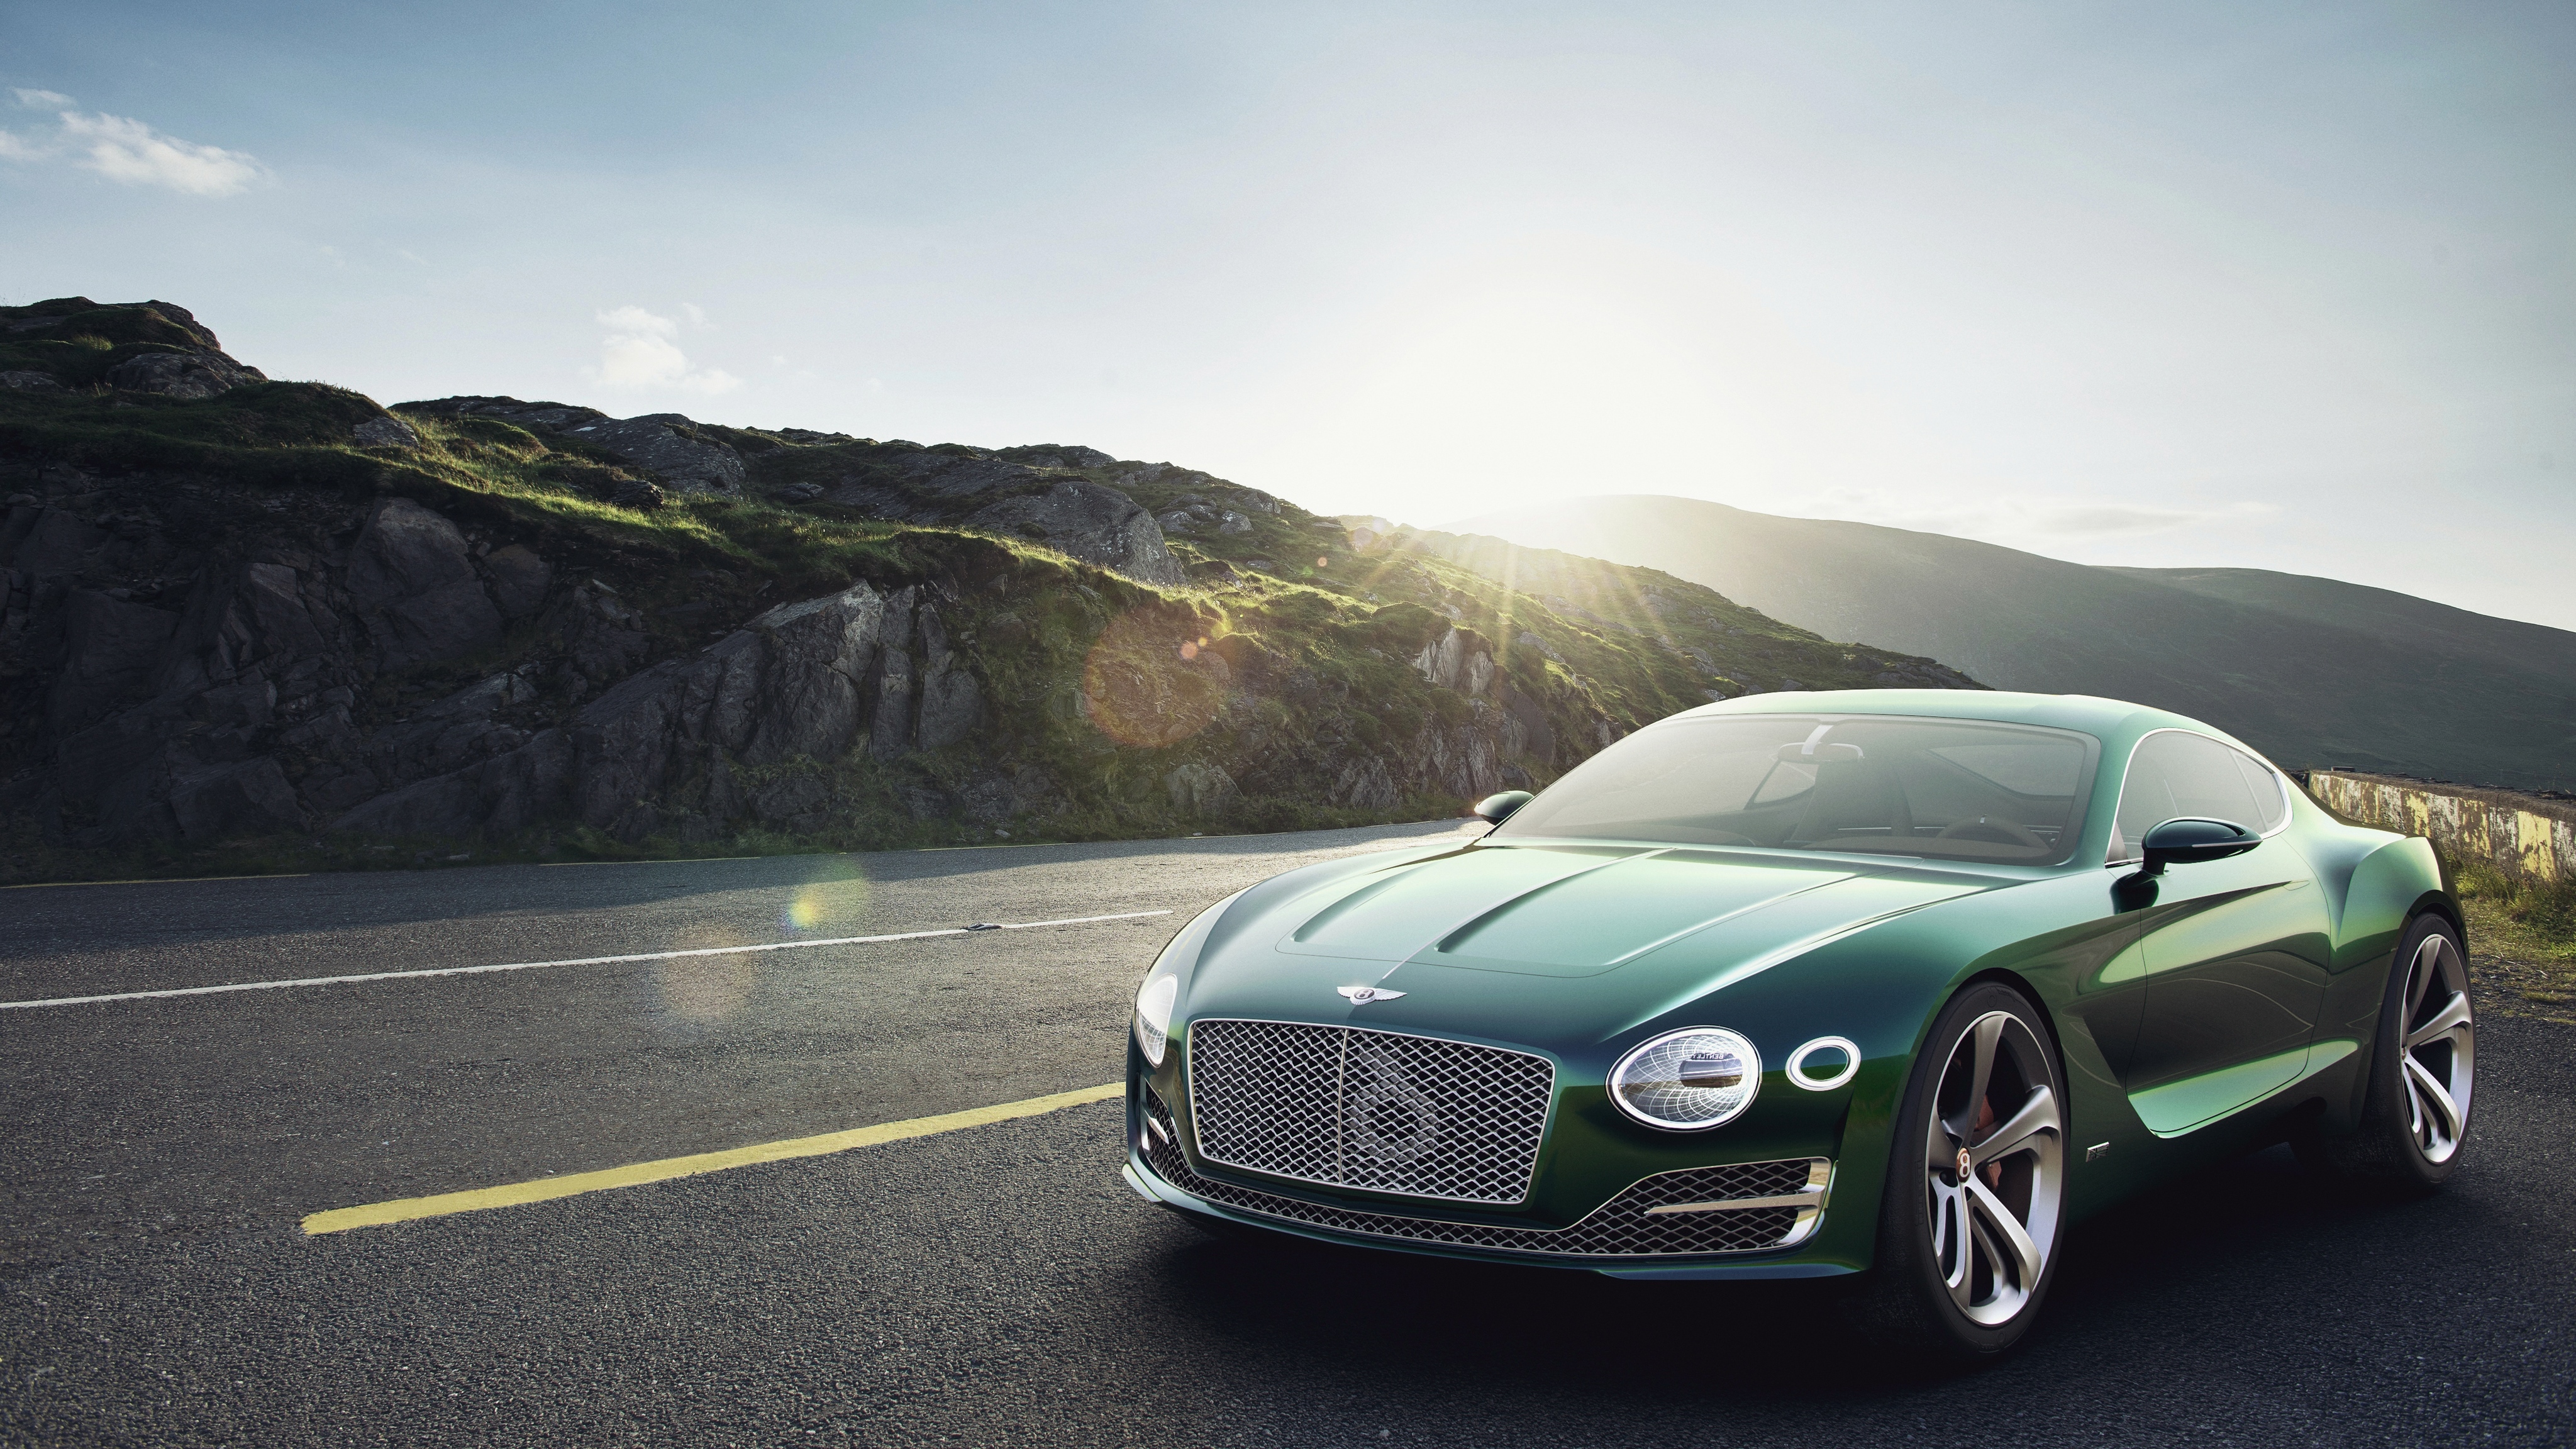 bentley, green, front view, cars, 2015, exp 10 wallpaper for mobile